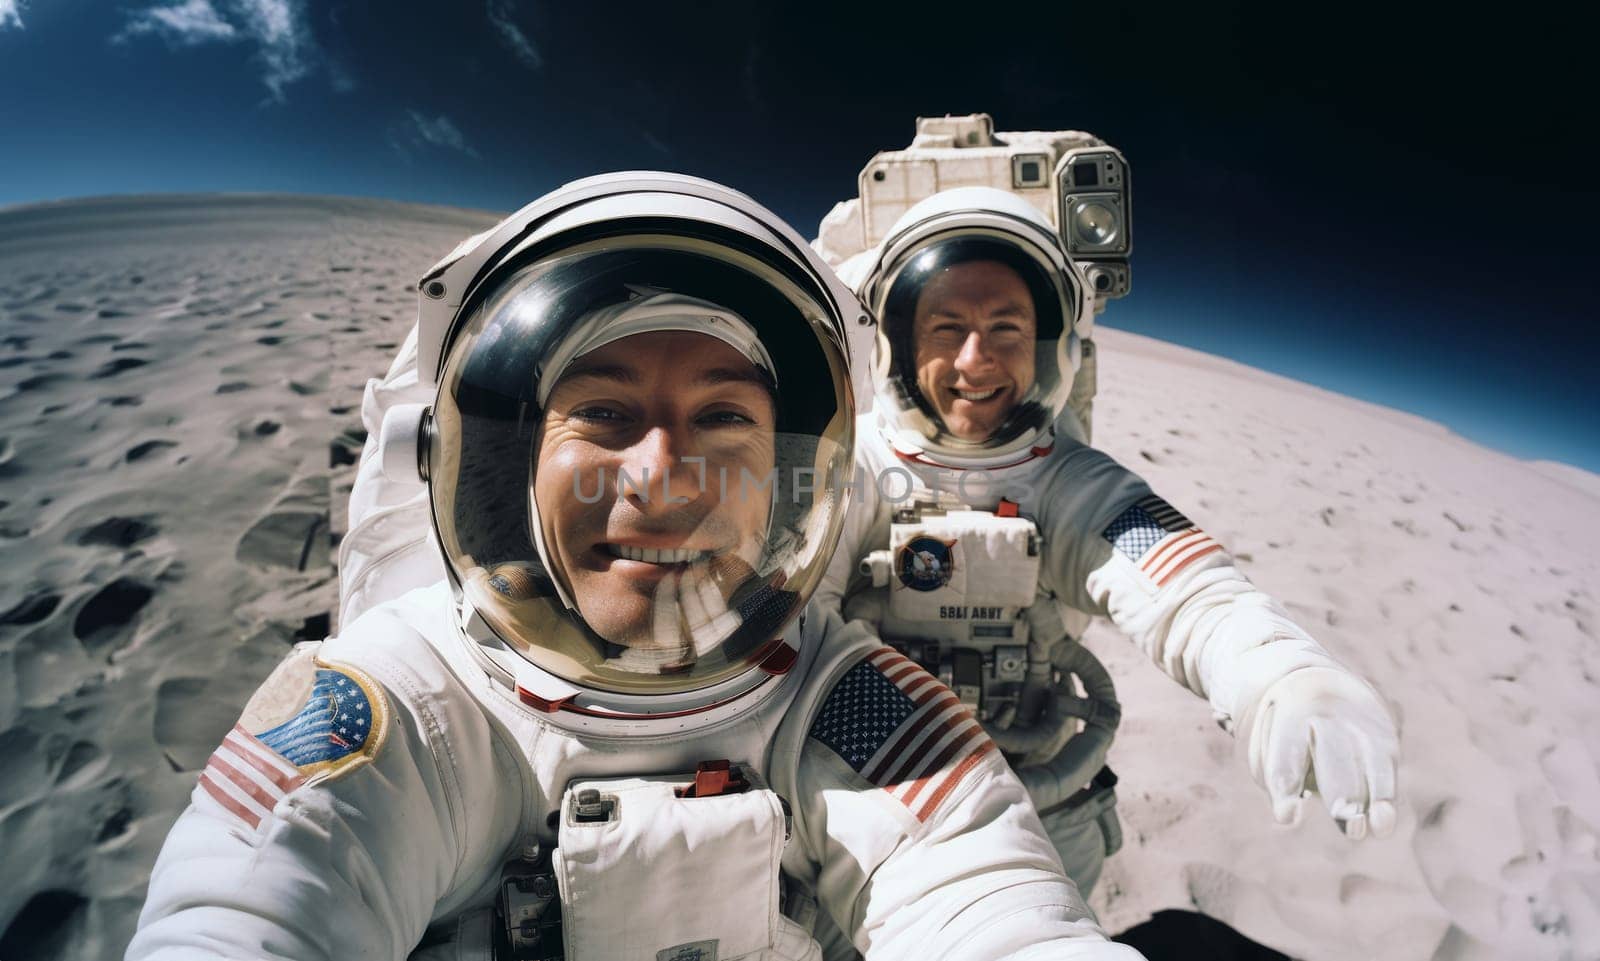 A selfie for the history books.Astronauts document their journey on the moon.